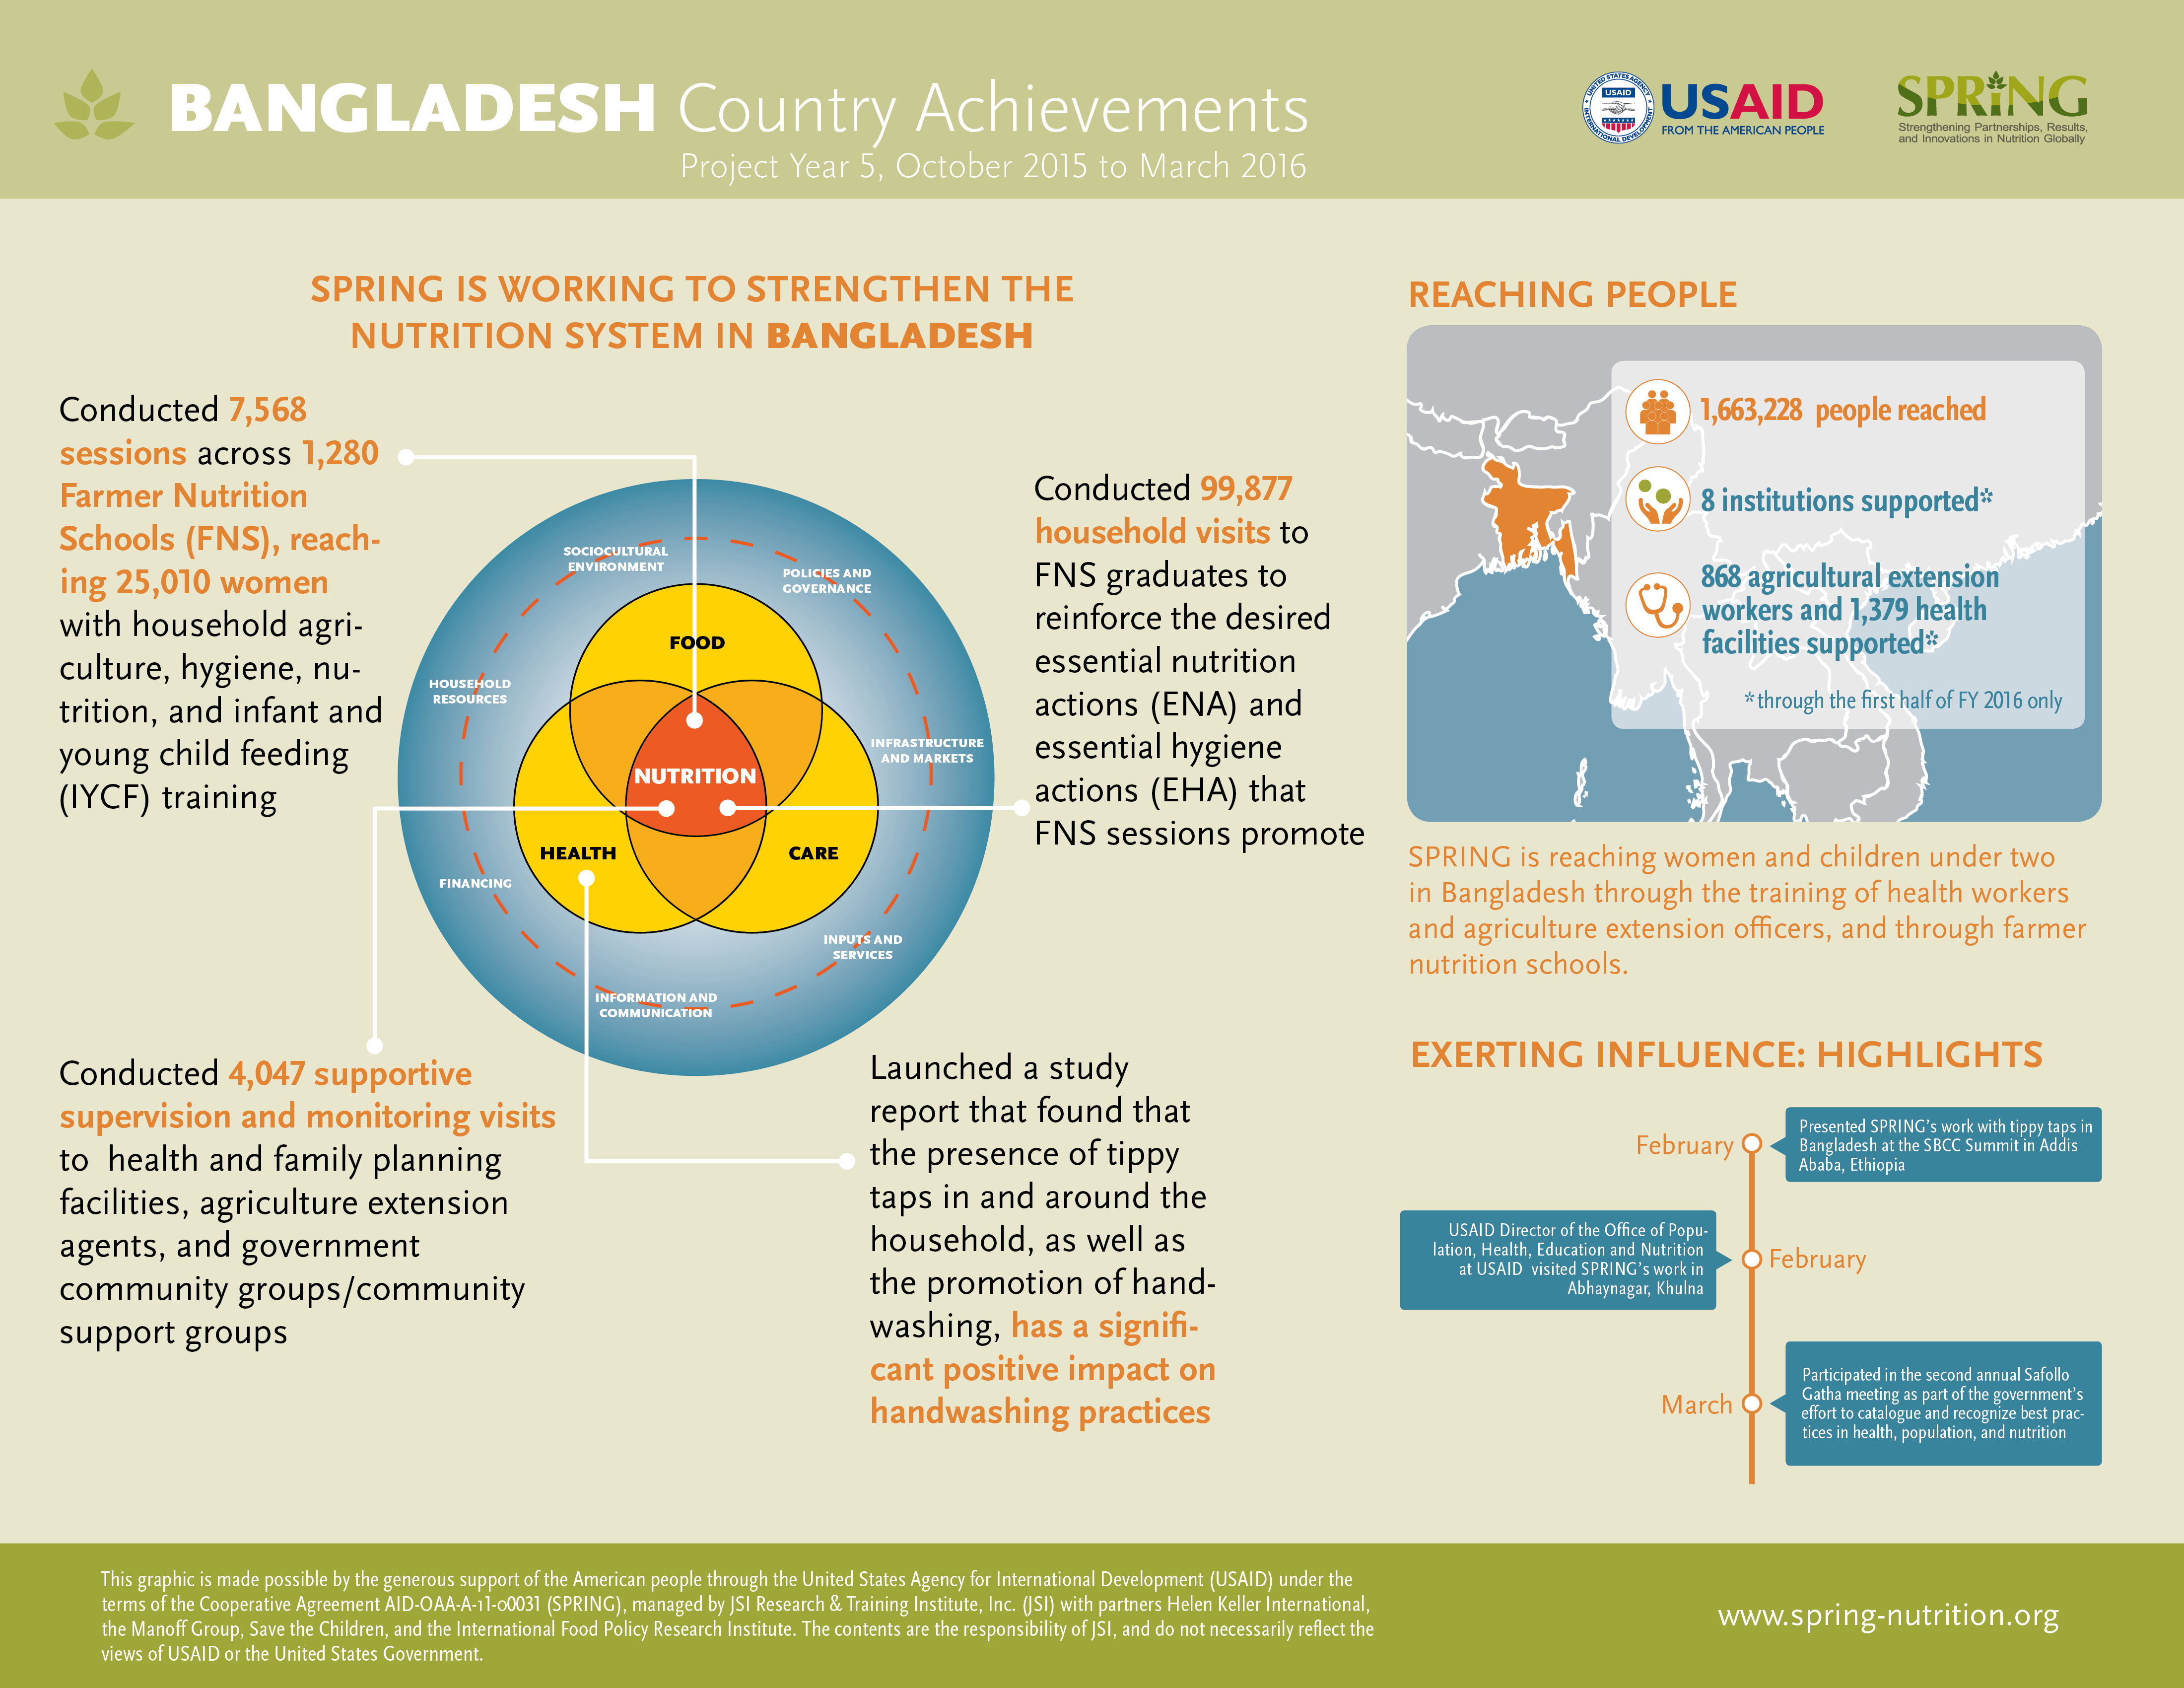 Bangladesh Country Achievements, Project Year 5, October 2015 to March 2016